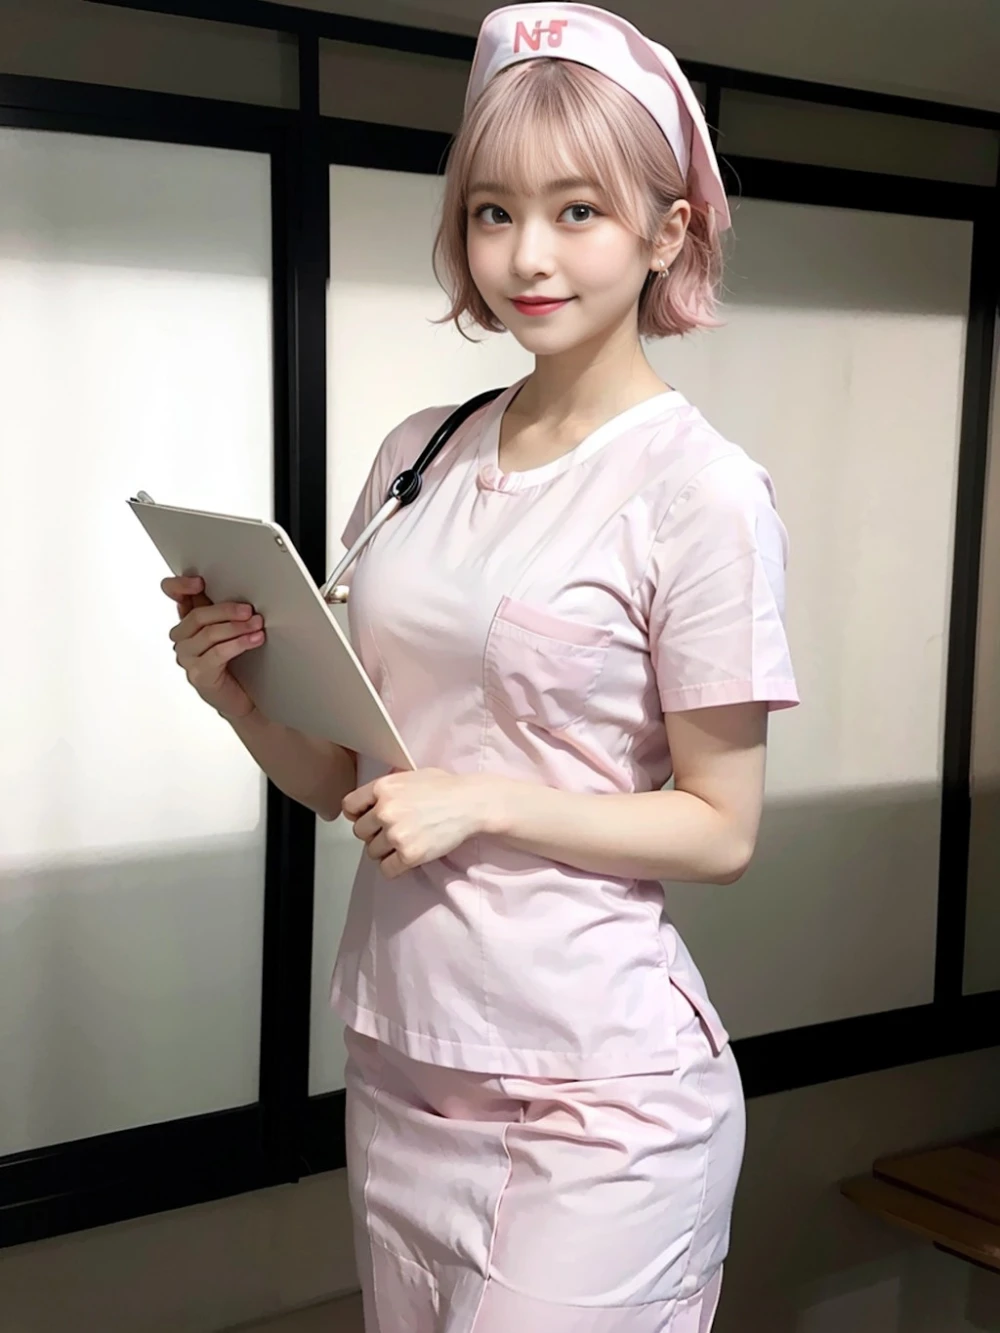 nurse-realistic-style-all-ages-2-50